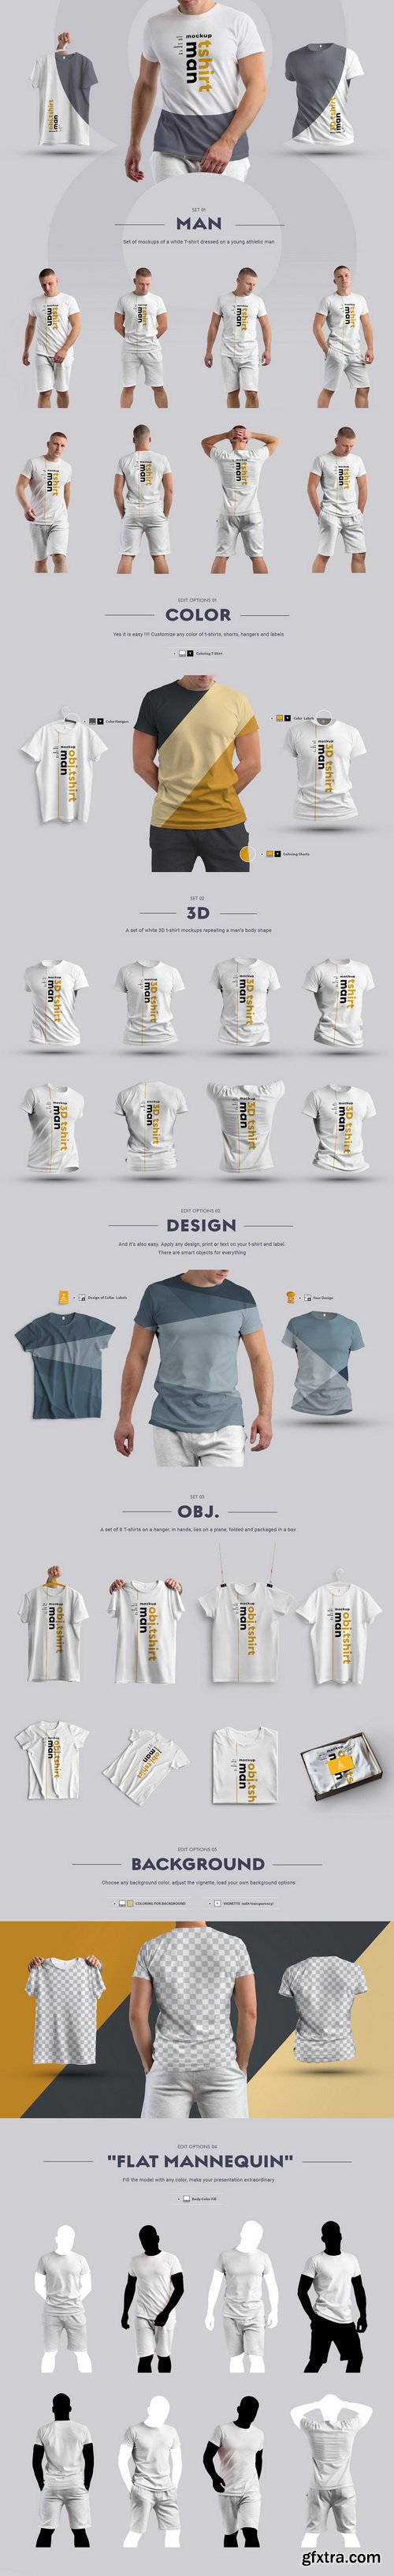 YellowImages - 24 MockUps Man T-Shirt - Man/3D/objects - 51791